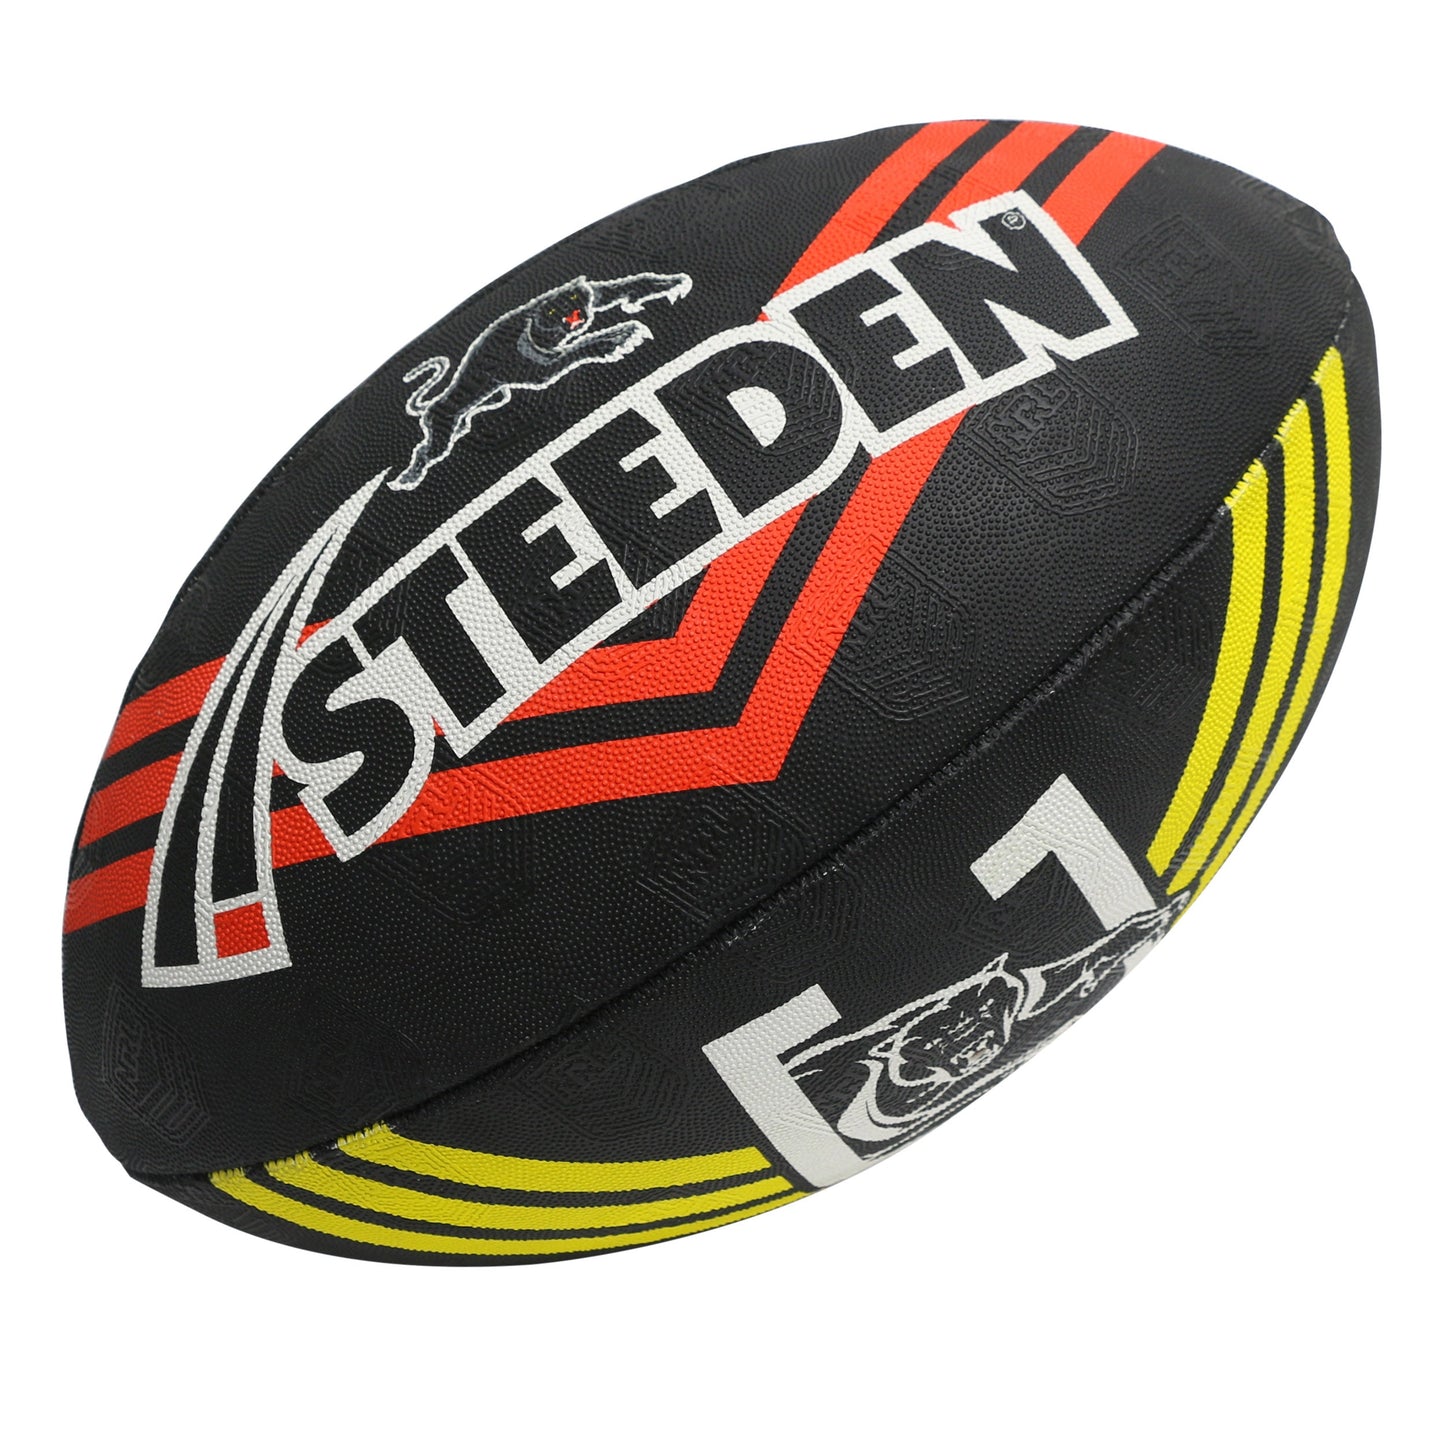 2023 Panthers Supporter Ball - Sz 5